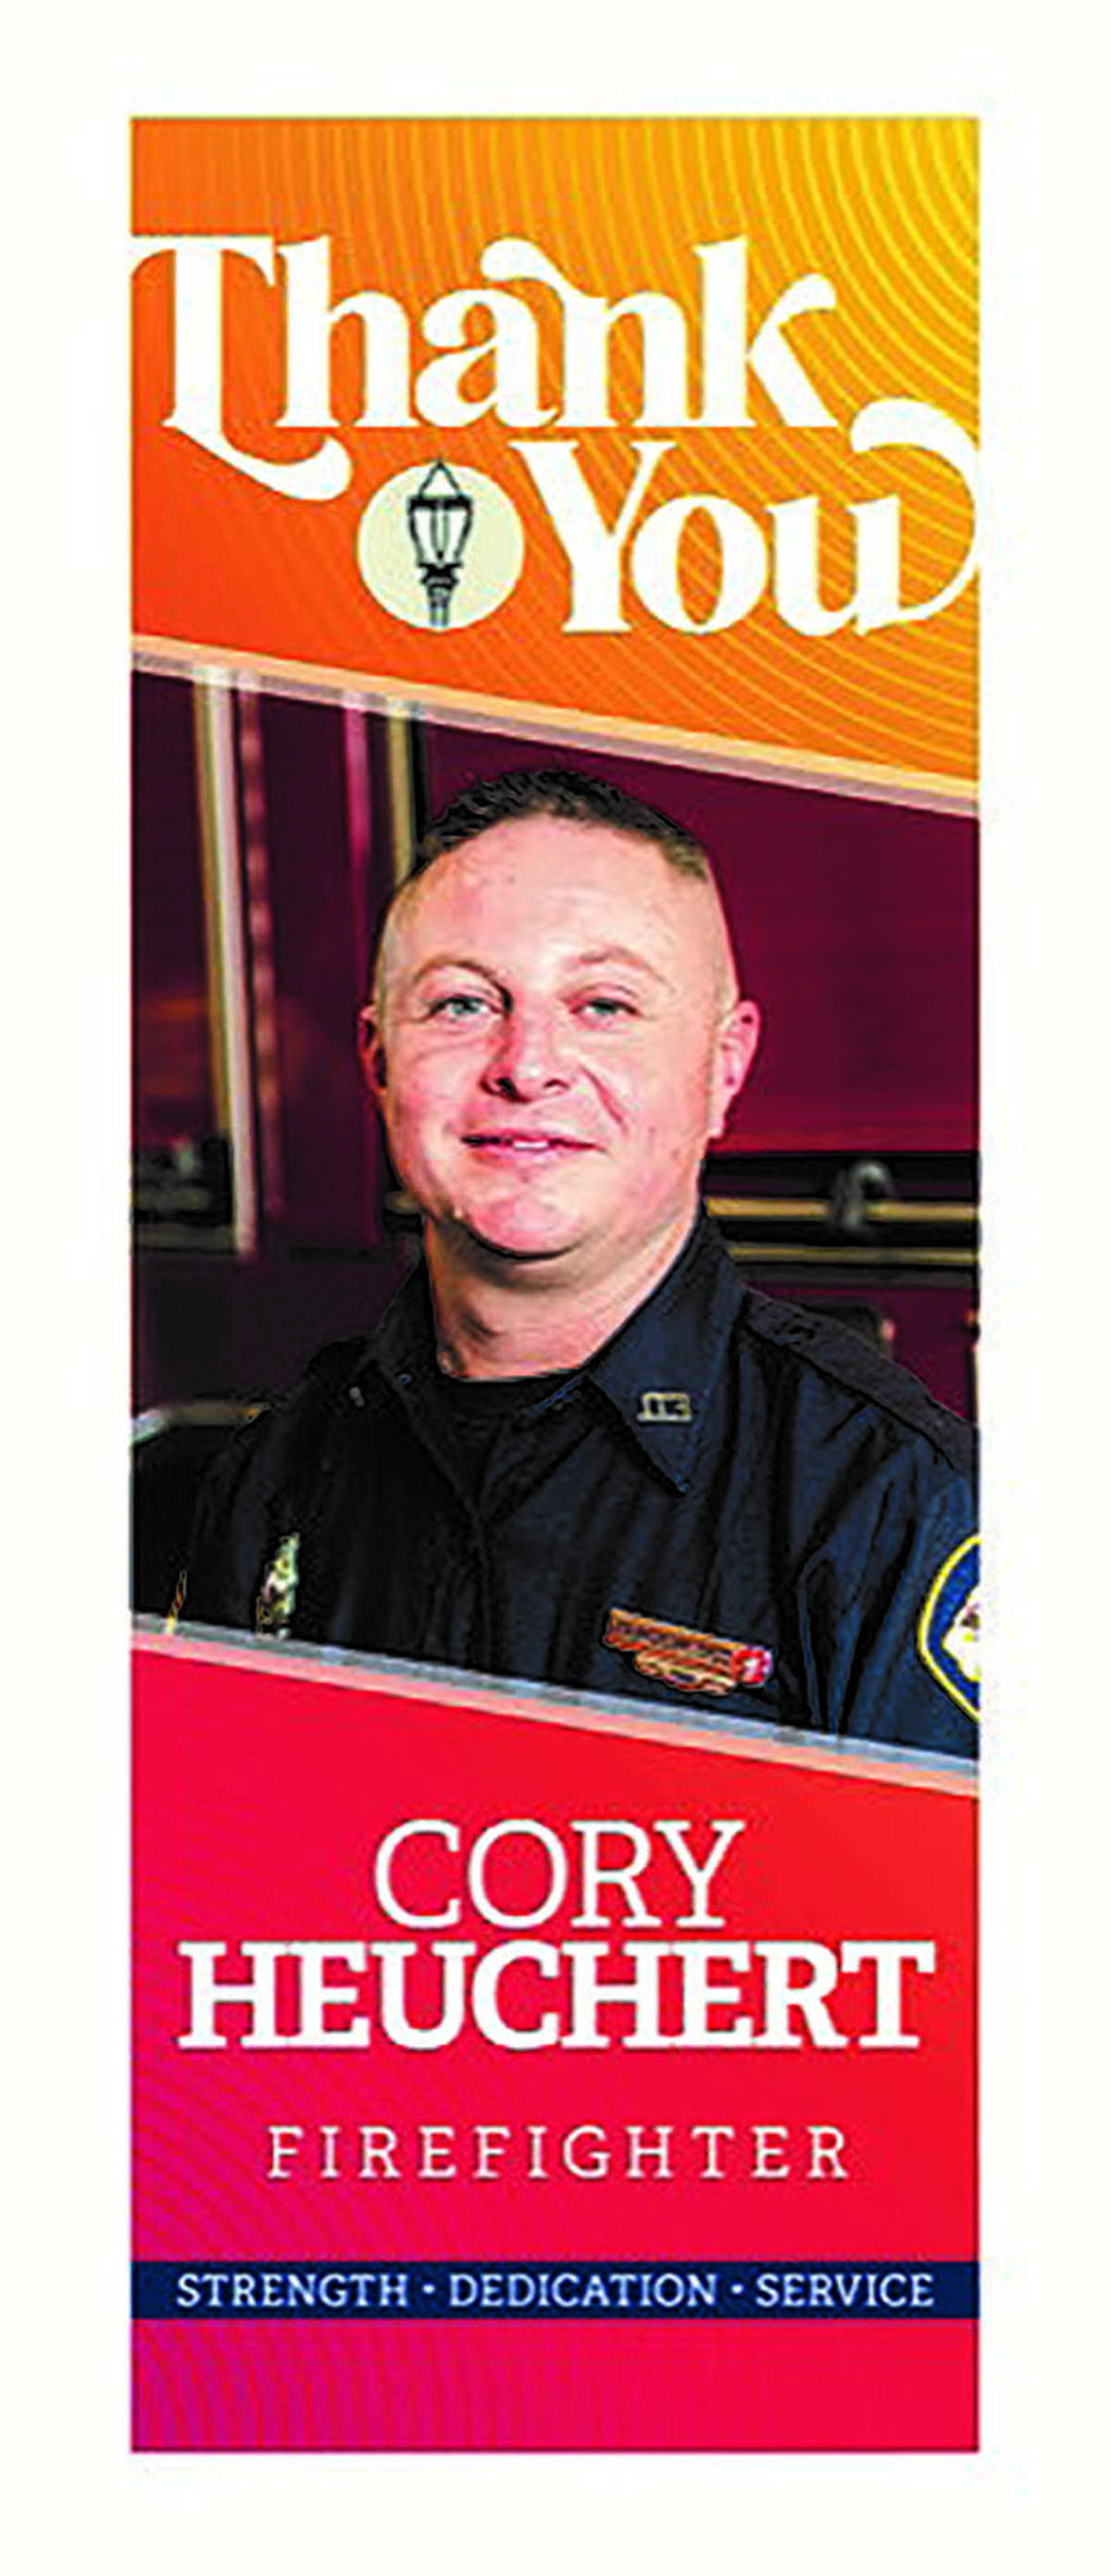 A sample of the spring banners the city will post on lamp poles later this year, featuring a city firefighter. Citizens who want to nominate someone to thank must do so by Feb. 20 (see story for details).